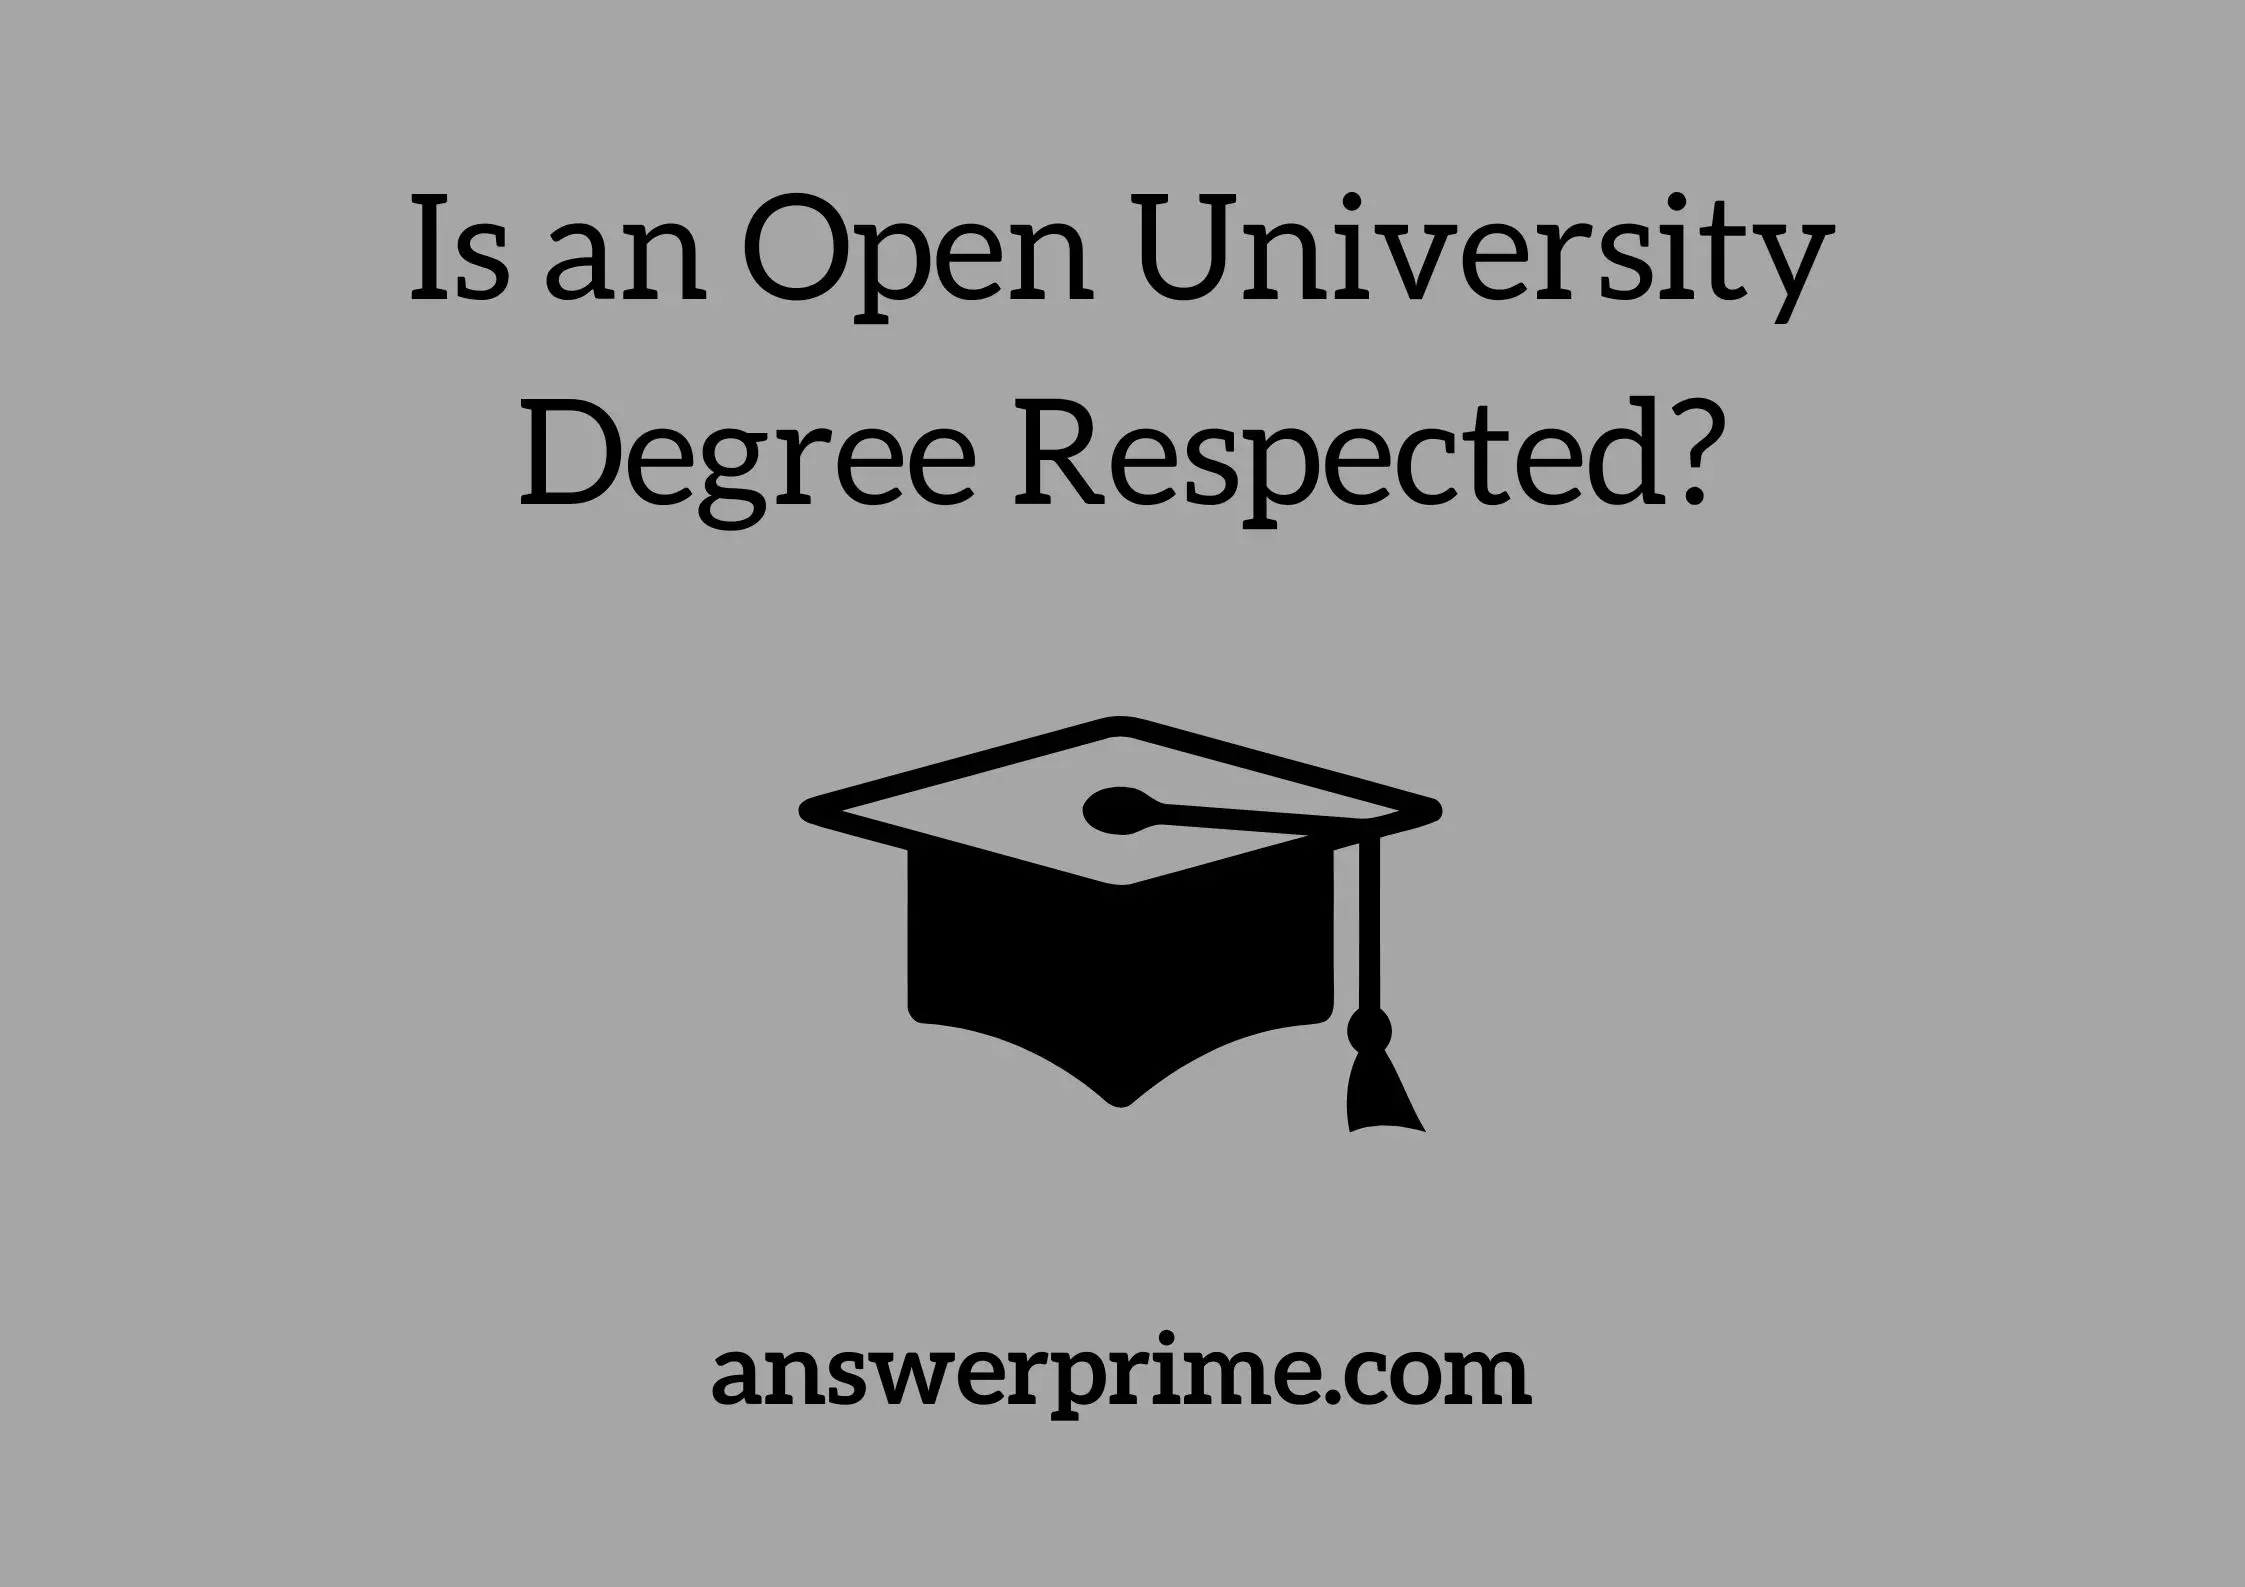 Is an Open University Degree Respected?